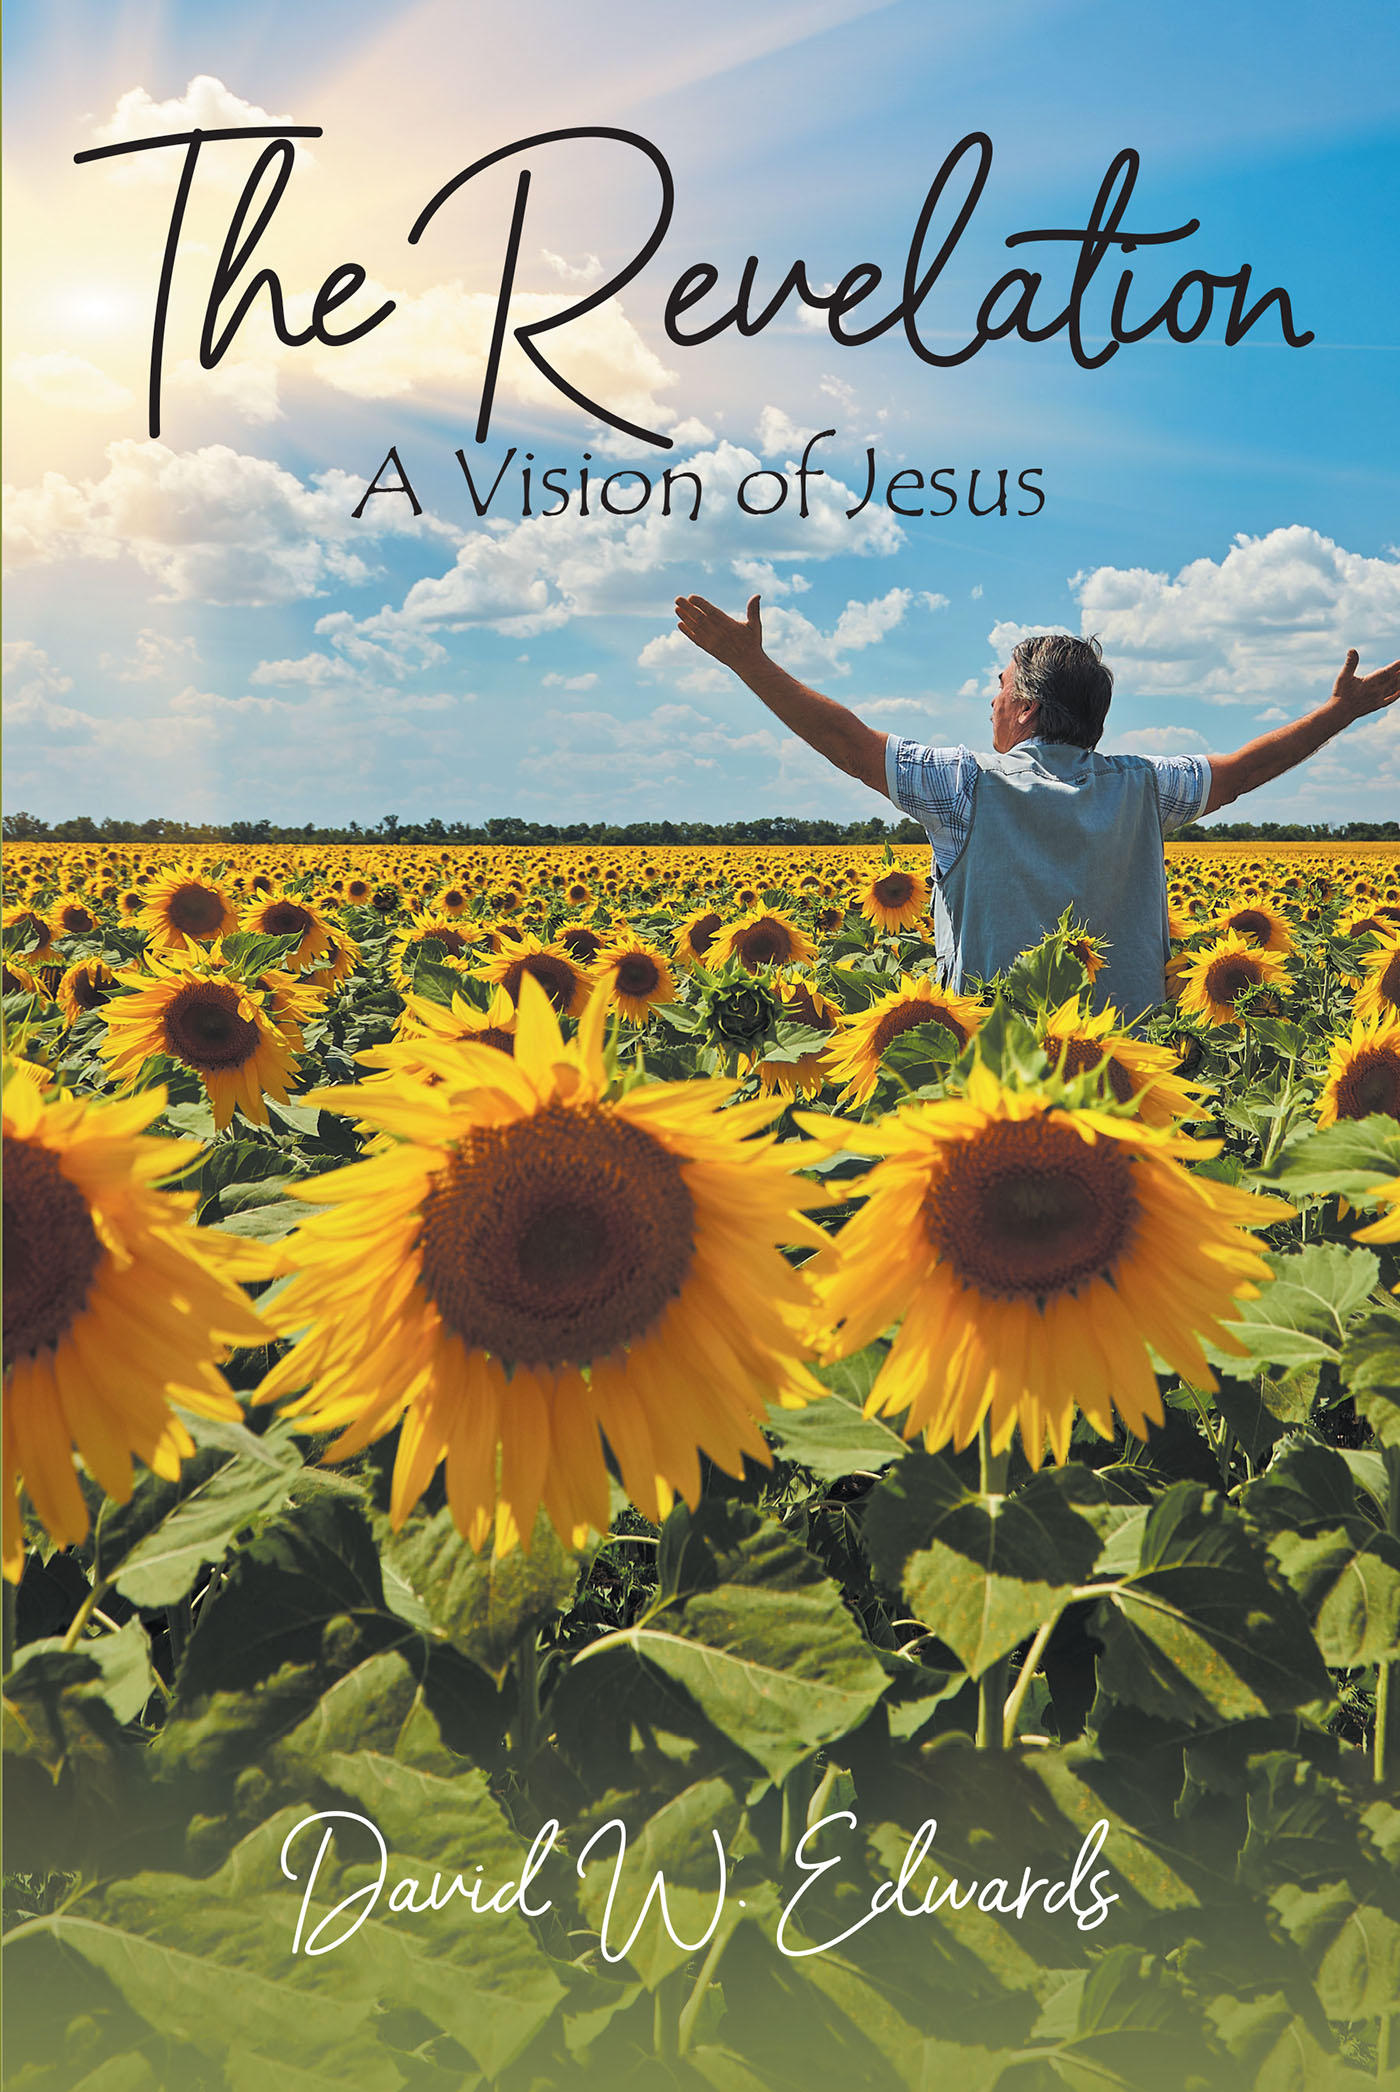 David W. Edwards’s Newly Released "The Revelation: A Vision of Jesus" is a Fresh Perspective on the Prophetic Book of Revelation